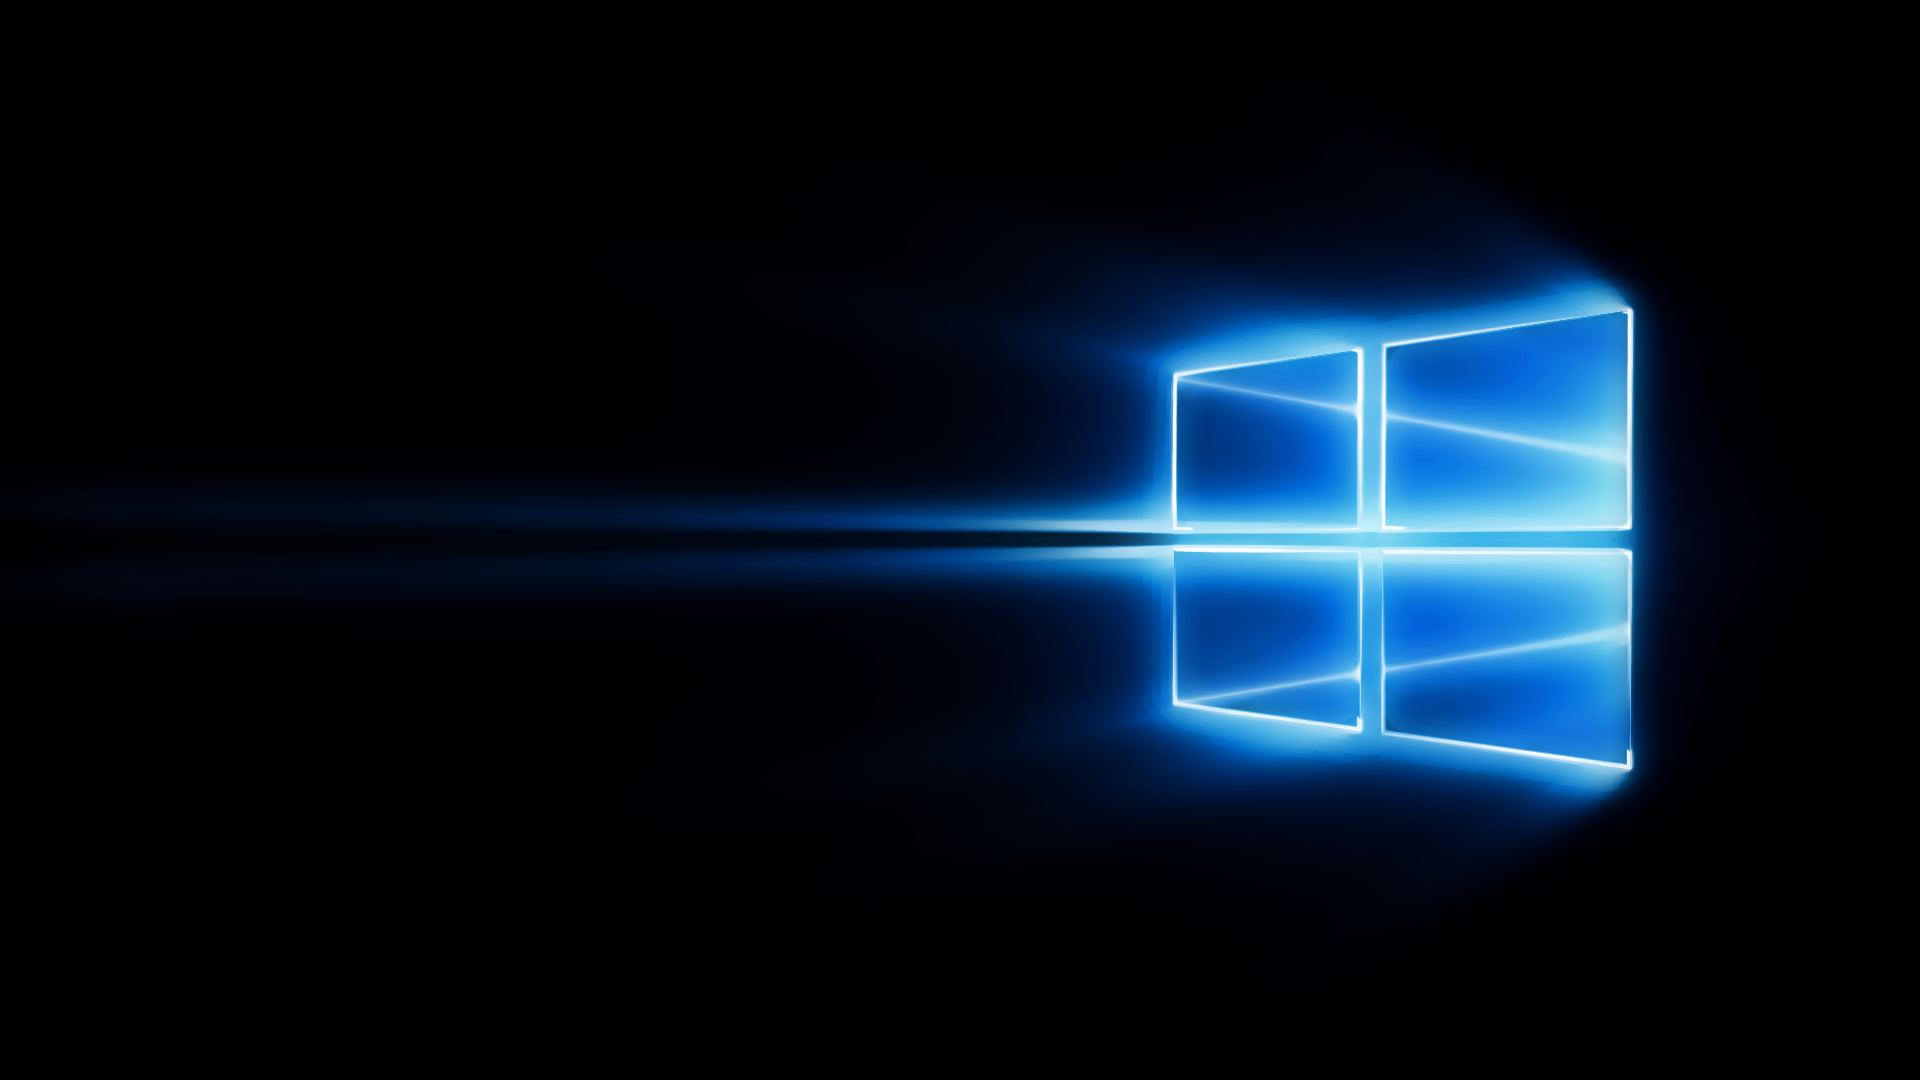 Windows 10 Wallpaper Colored by Sameed Khan on Dribbble